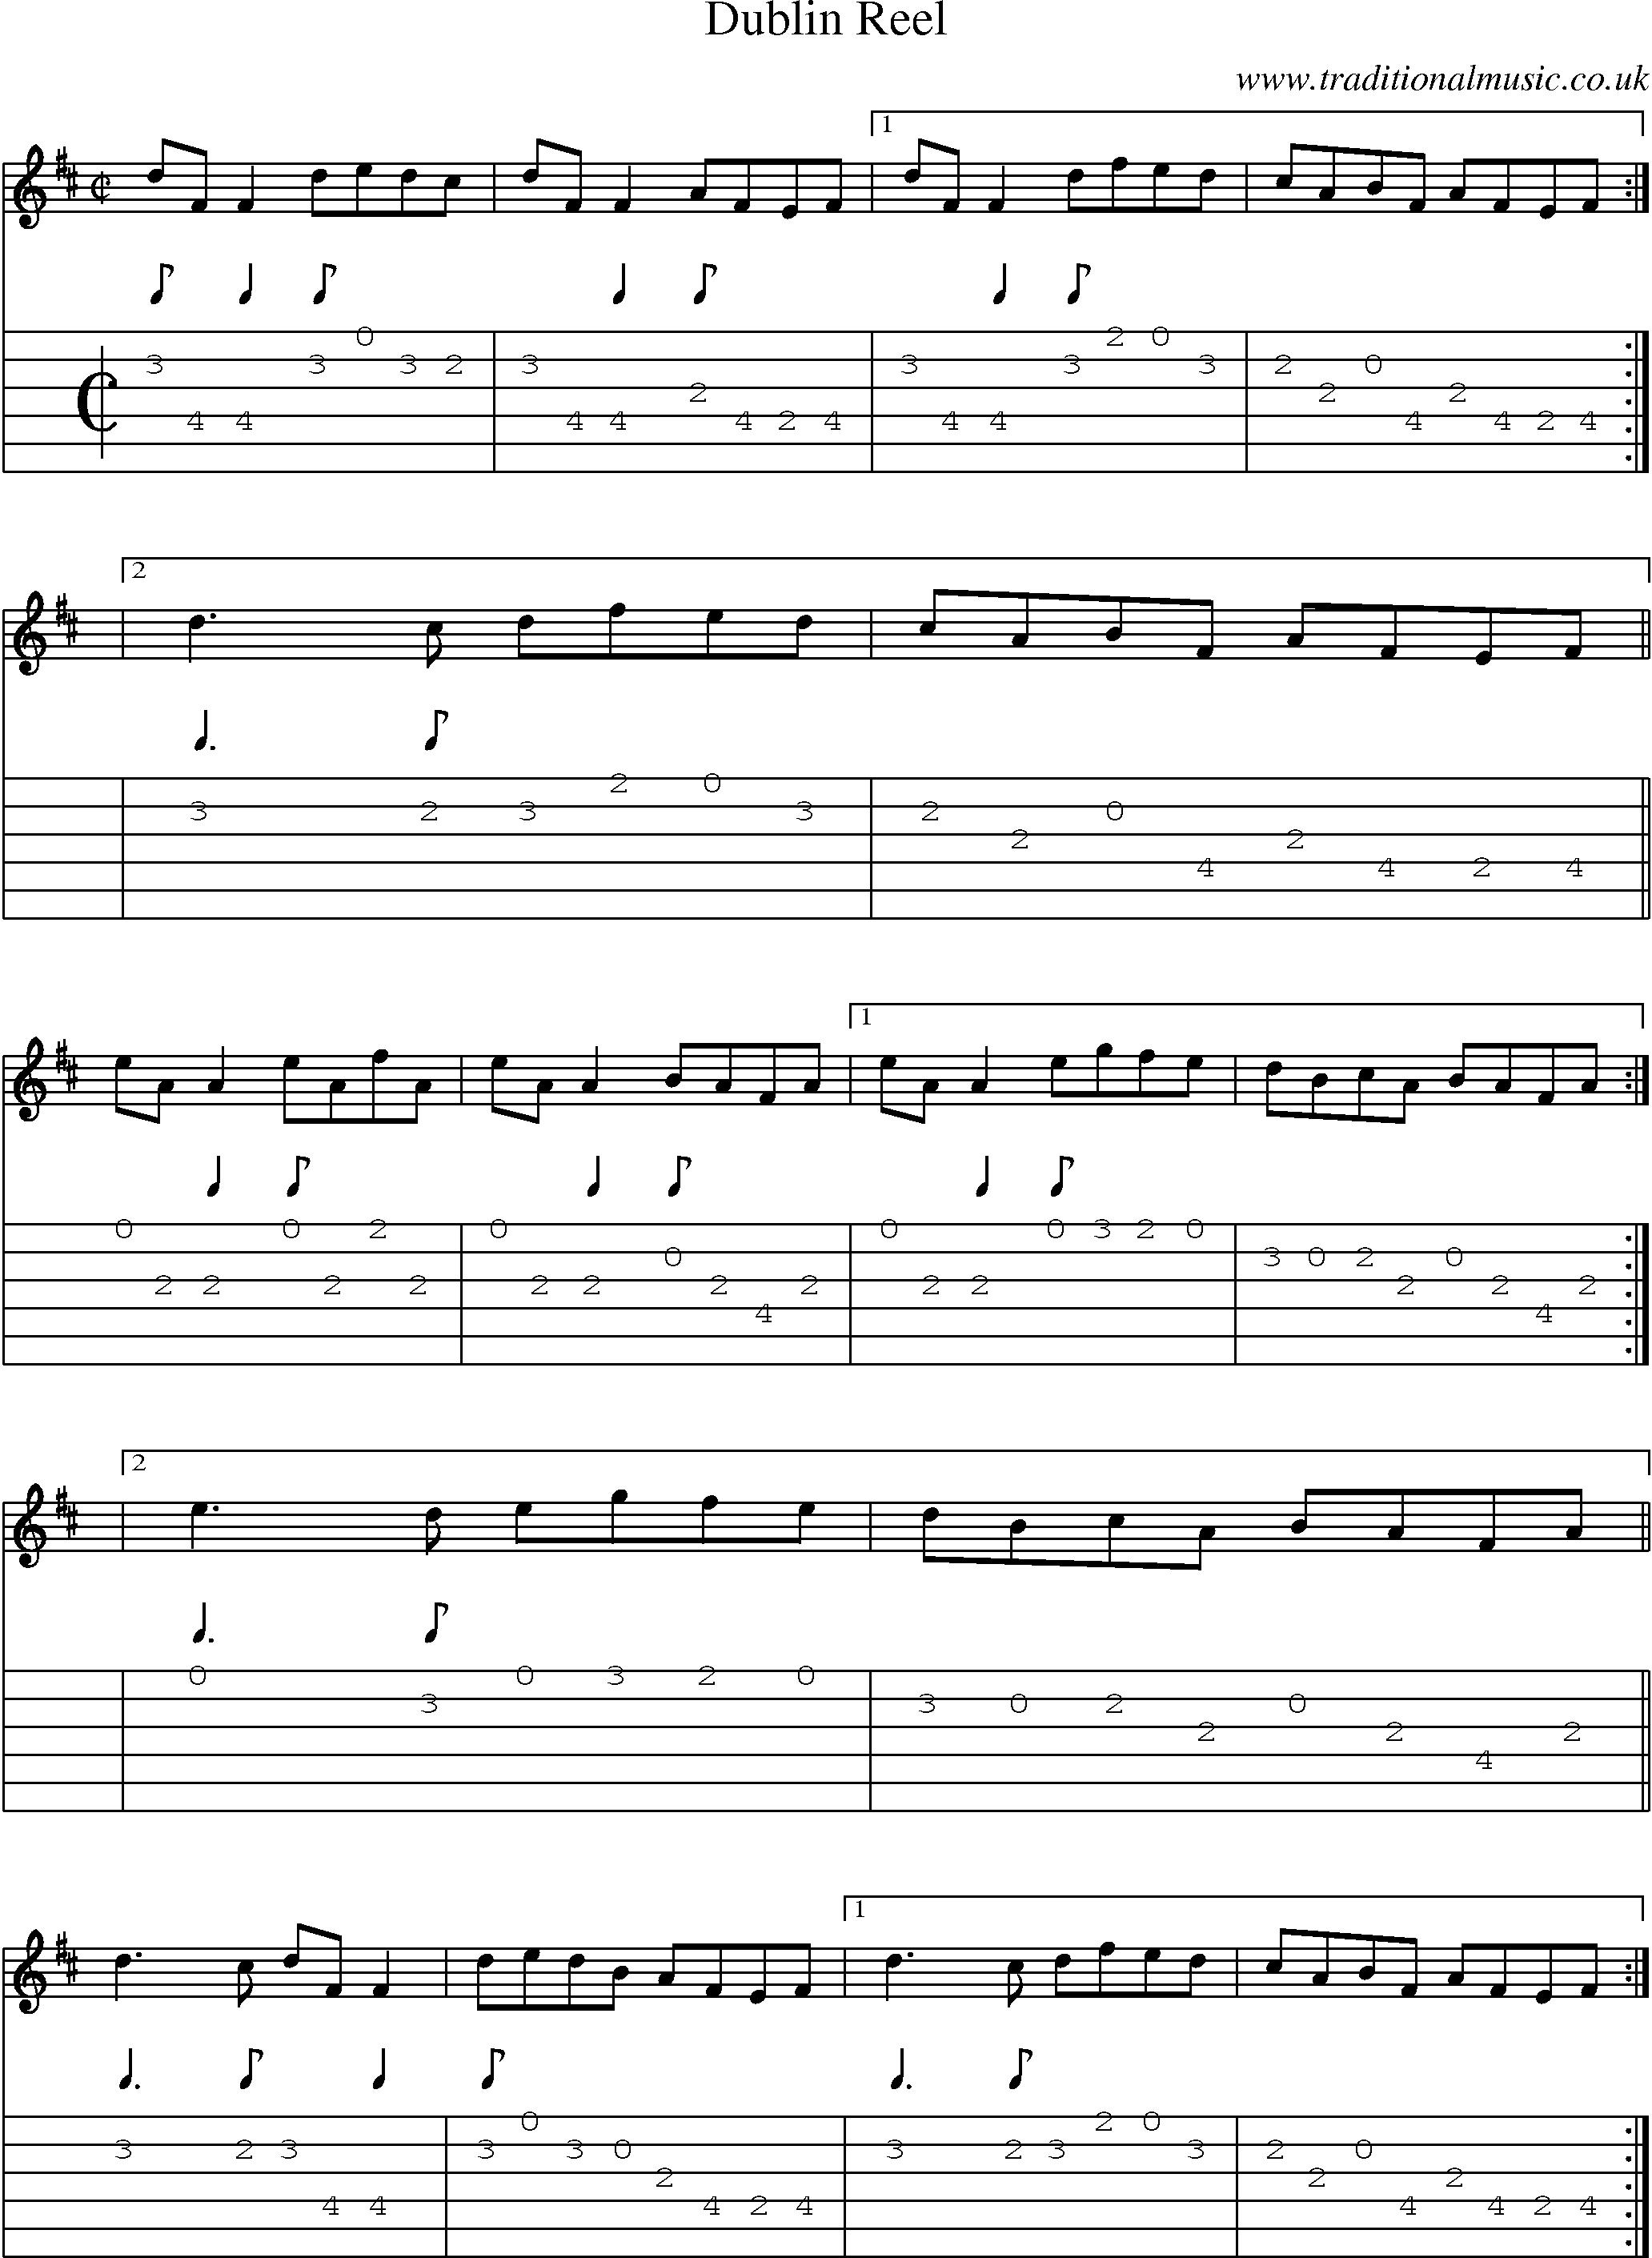 Music Score and Guitar Tabs for Dublin Reel